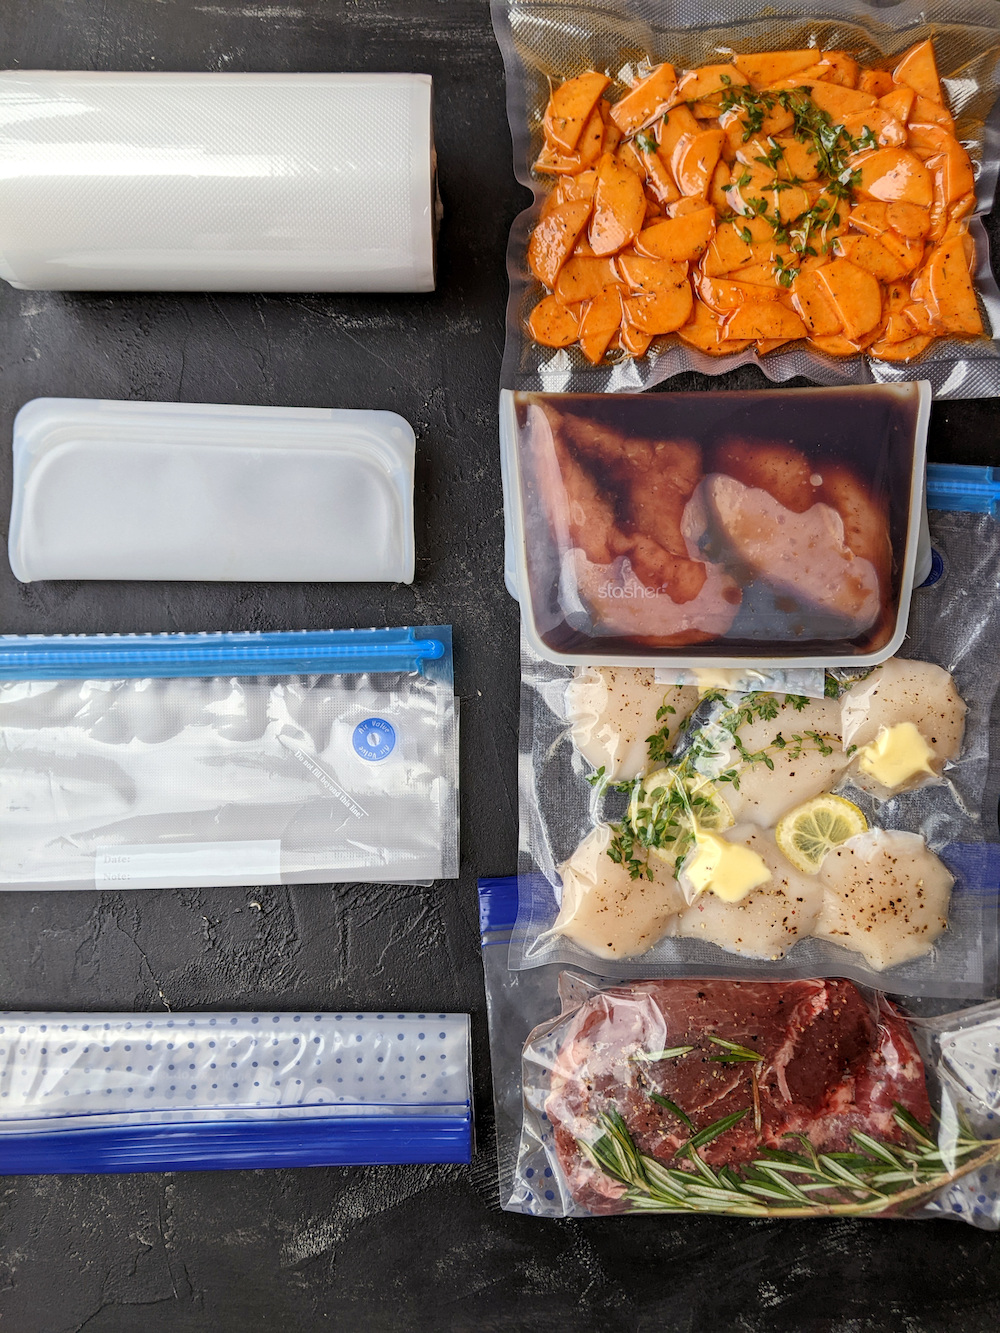 Avid Armor Community - Vacuum Sealing, Meal Prepping and Sous Vide